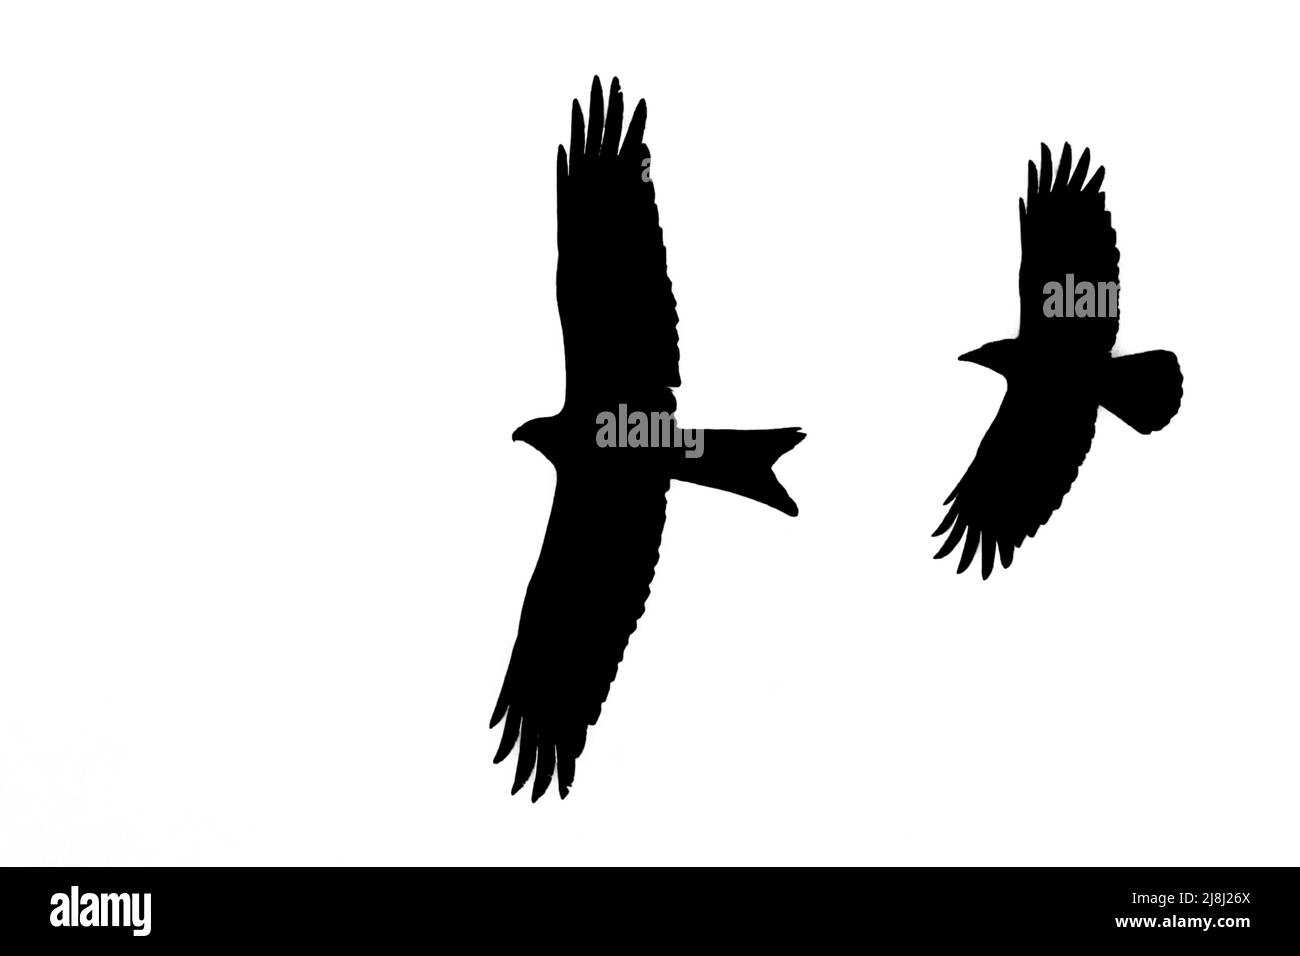 Silhouette of red kite (Milvus milvus) in flight mobbed by common raven, outlined against white background to show wings, head and tail shapes Stock Photo